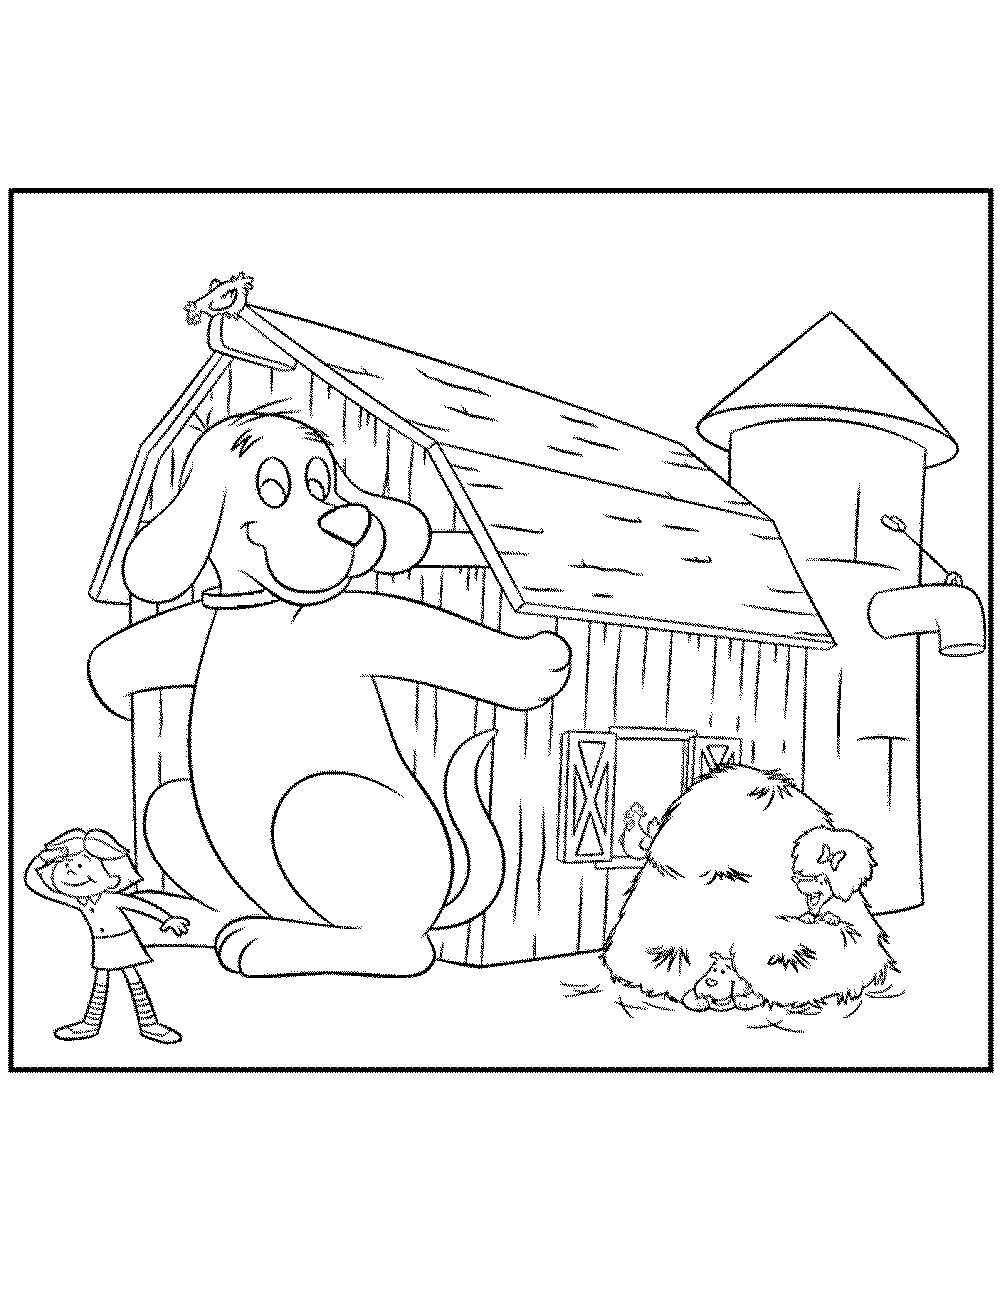 Coloring The big dog on the farm. Category the dog. Tags:  dog, farm.